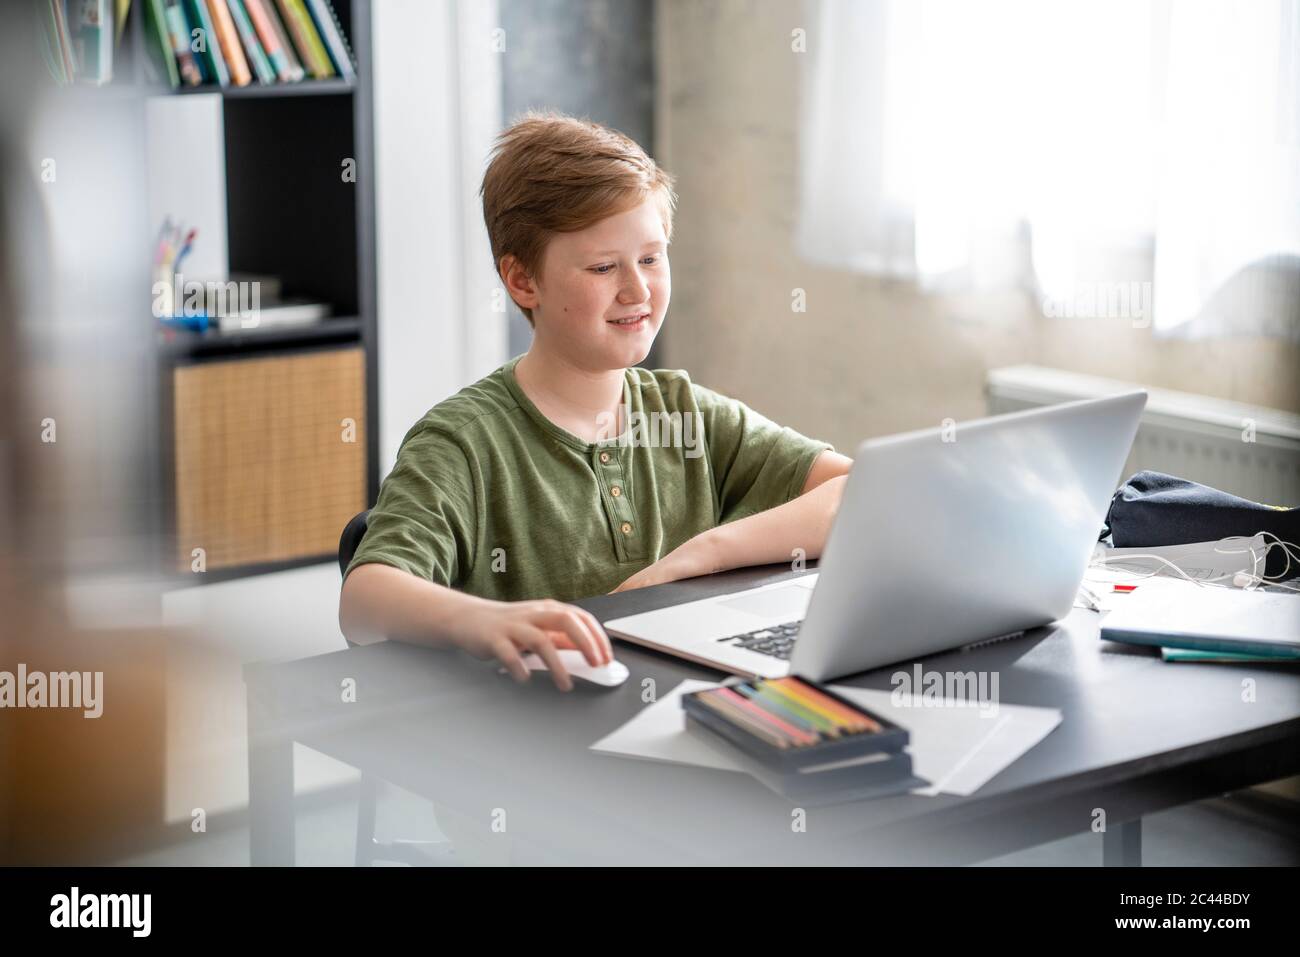 Boy learning at lapop for homeschooling Stock Photo